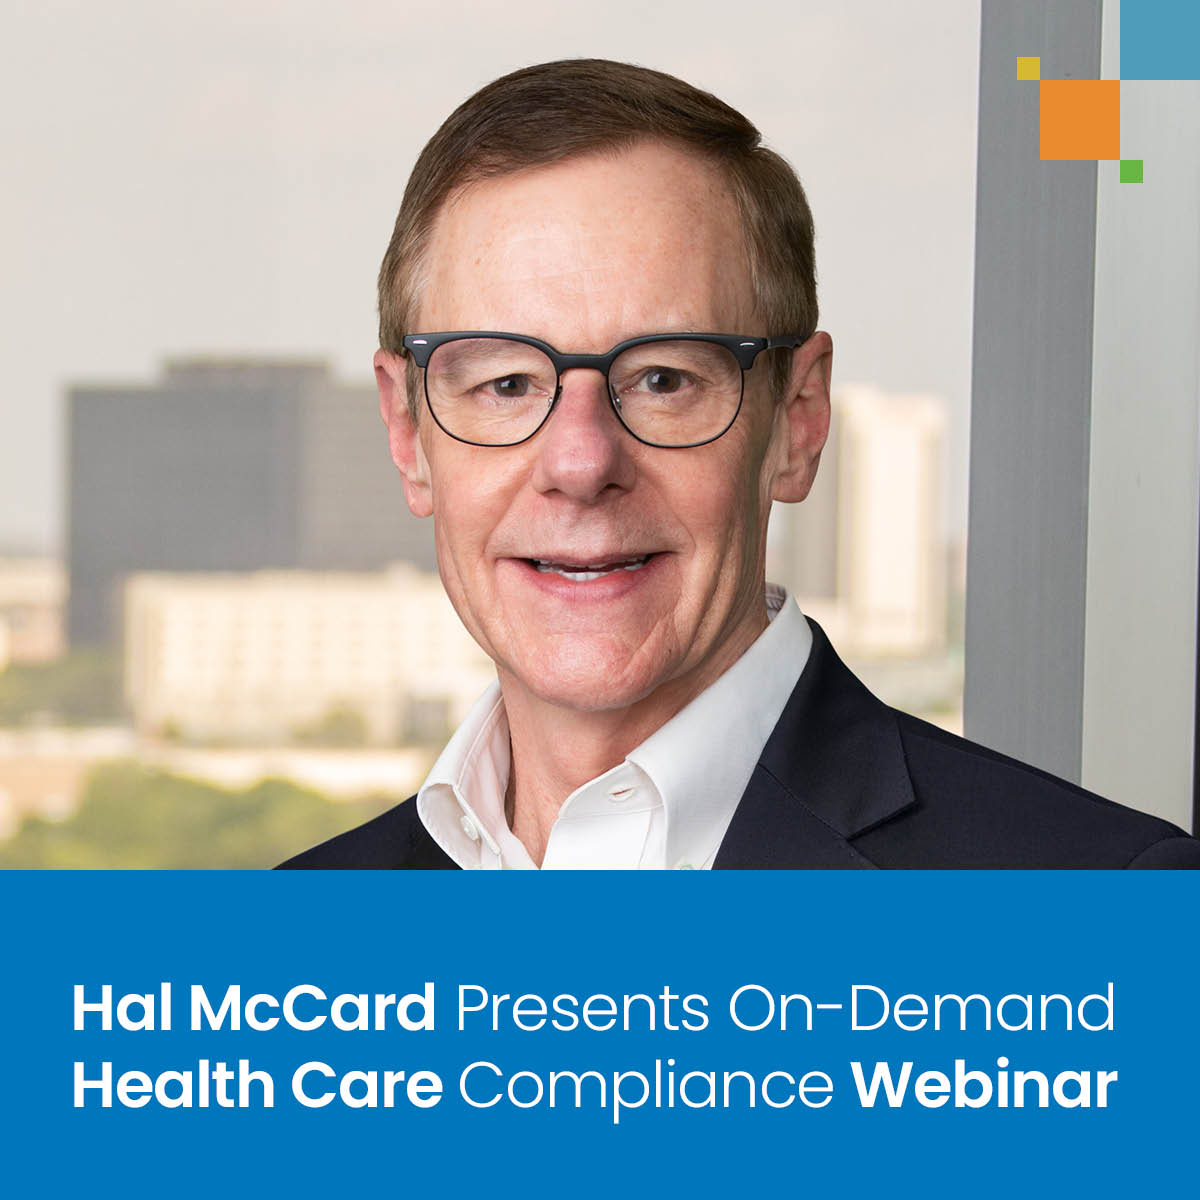 Webinar on Health Care Compliance at Your Fingertips with Hal McCard